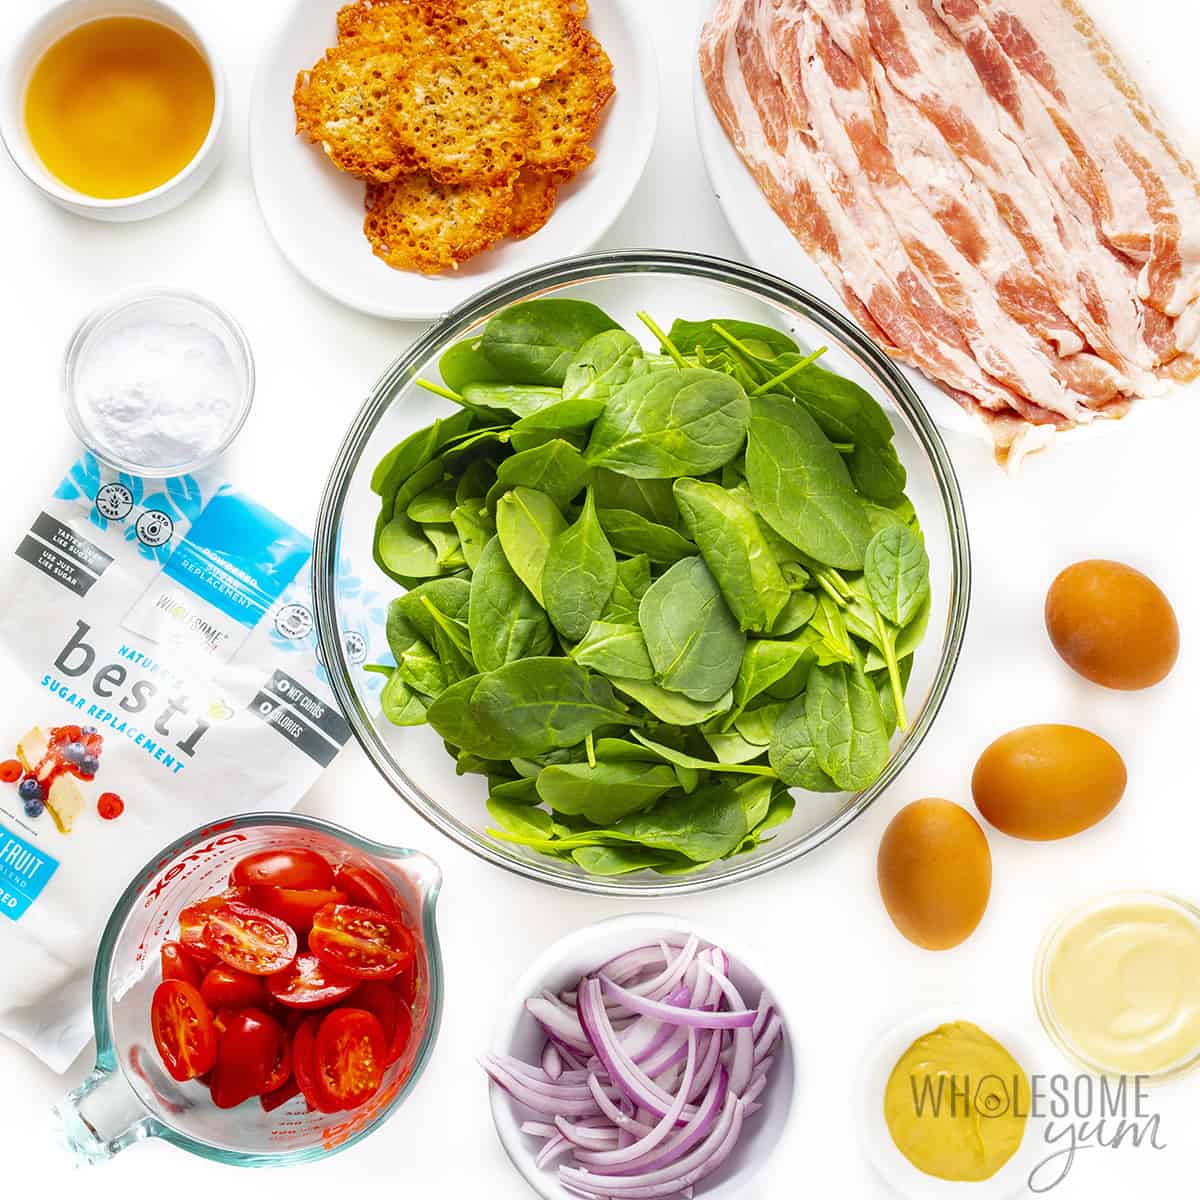 Ingredients for spinach salad with bacon dressing in bowls.